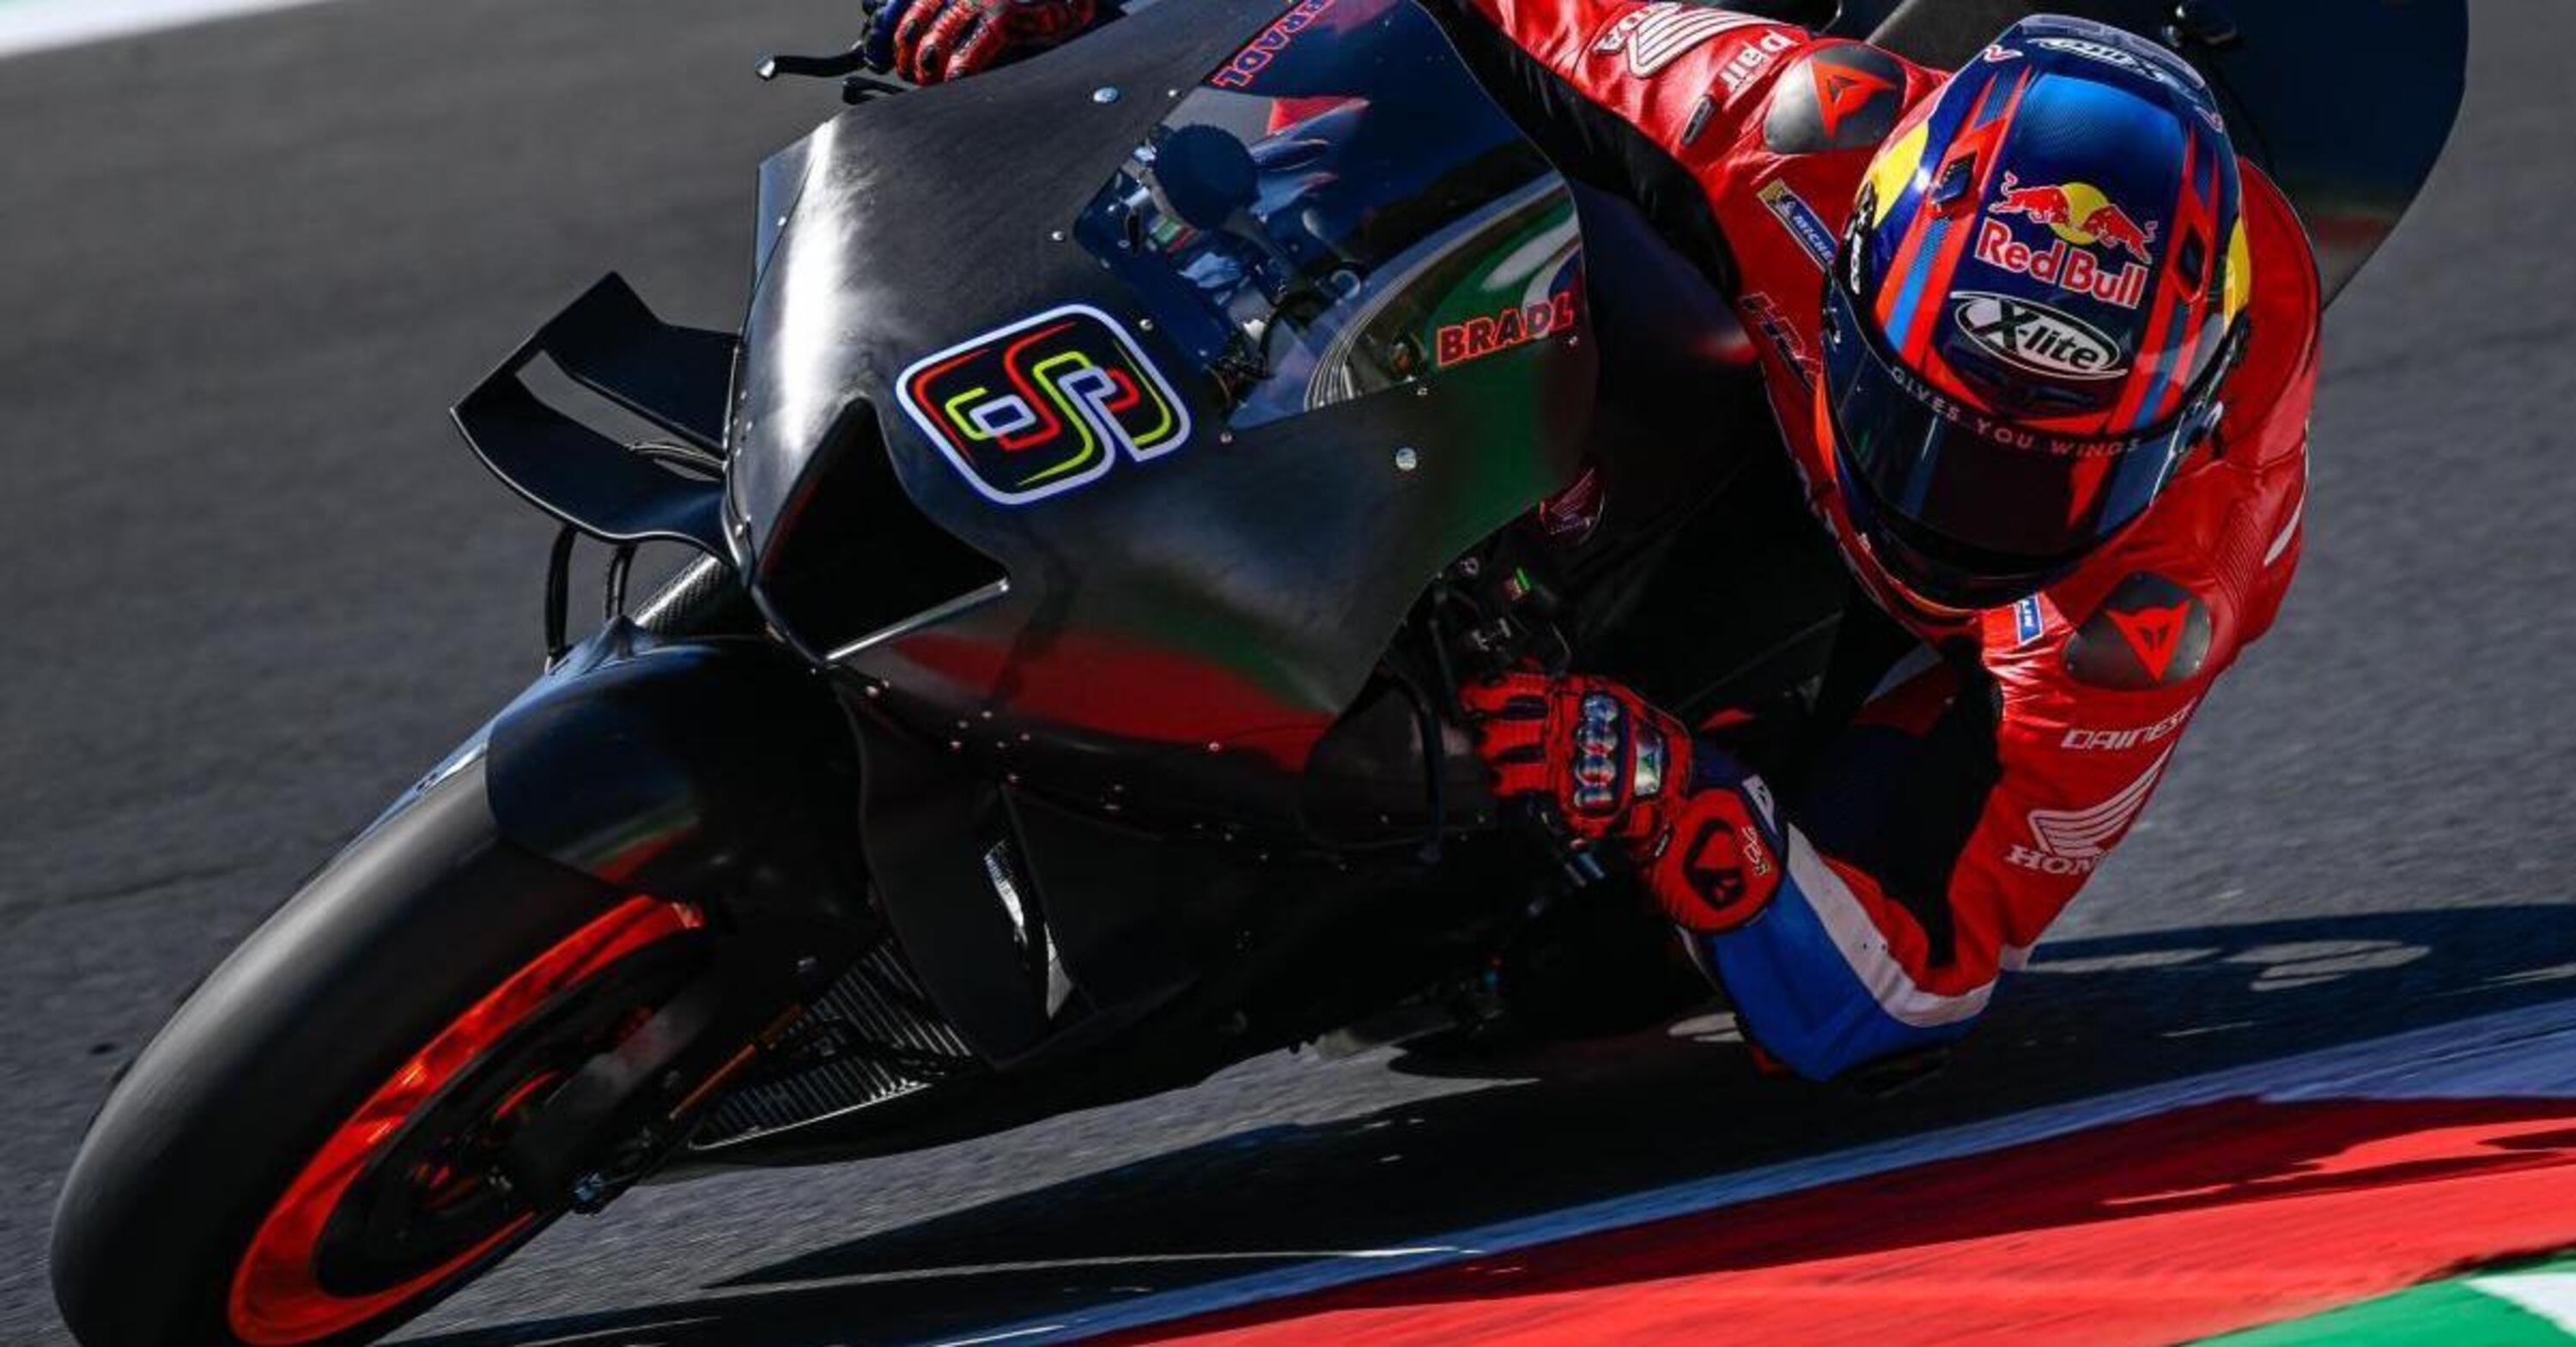 MotoGP 2023. MotoGP 2023. Stefan Bradl and the new Honda: "Yes, I ride with a Kalex aluminum swingarm and an Akrapovic exhaust system".